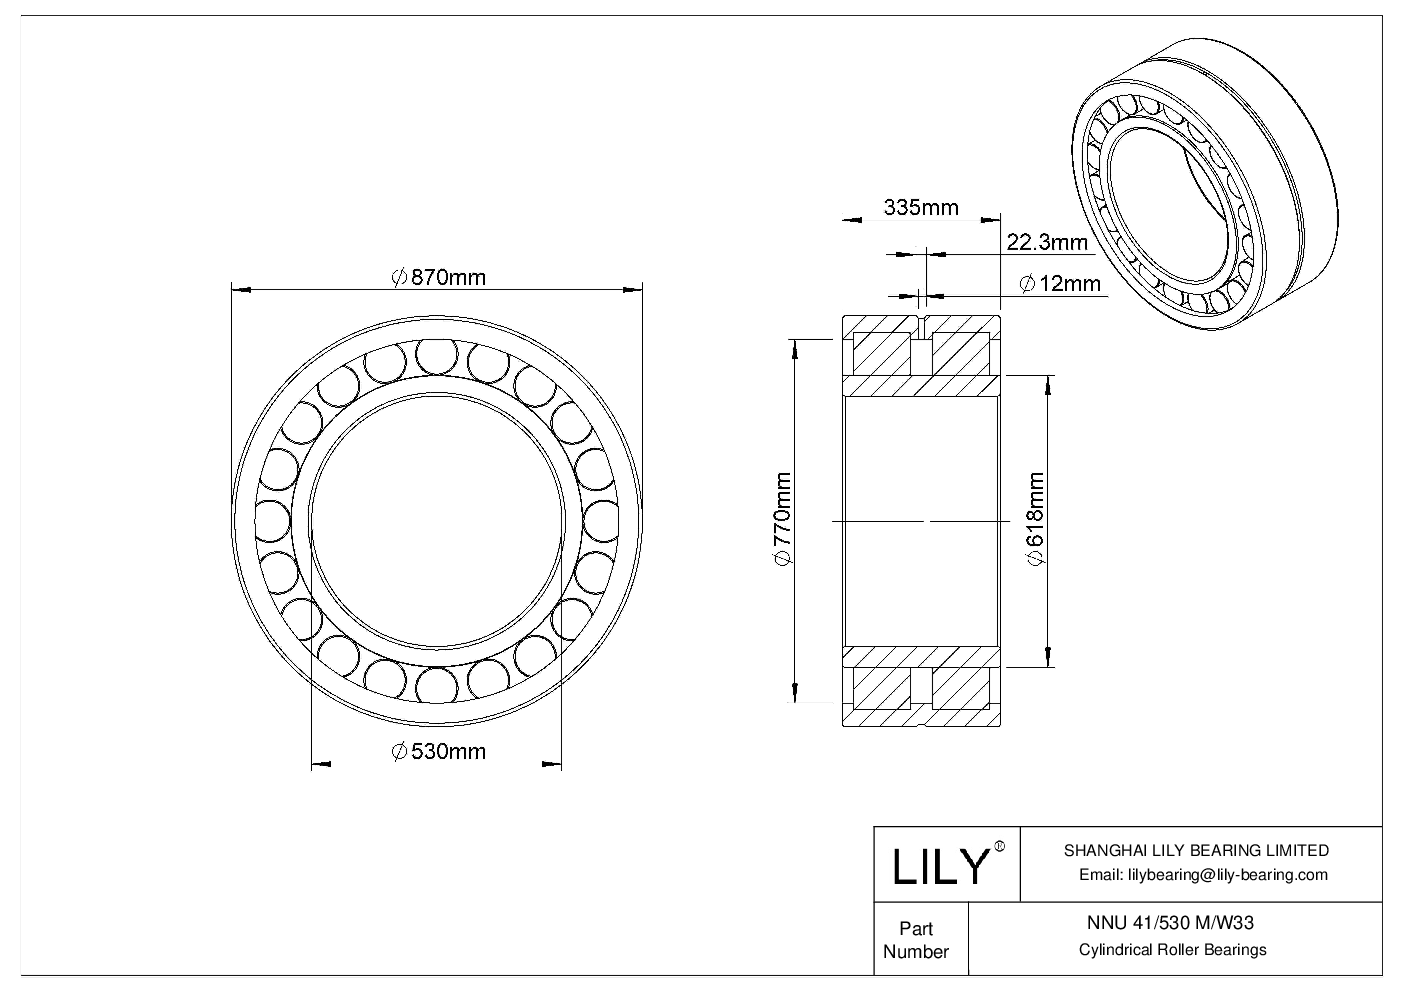 NNU 41/530 M/W33 Double Row Cylindrical Roller Bearings cad drawing